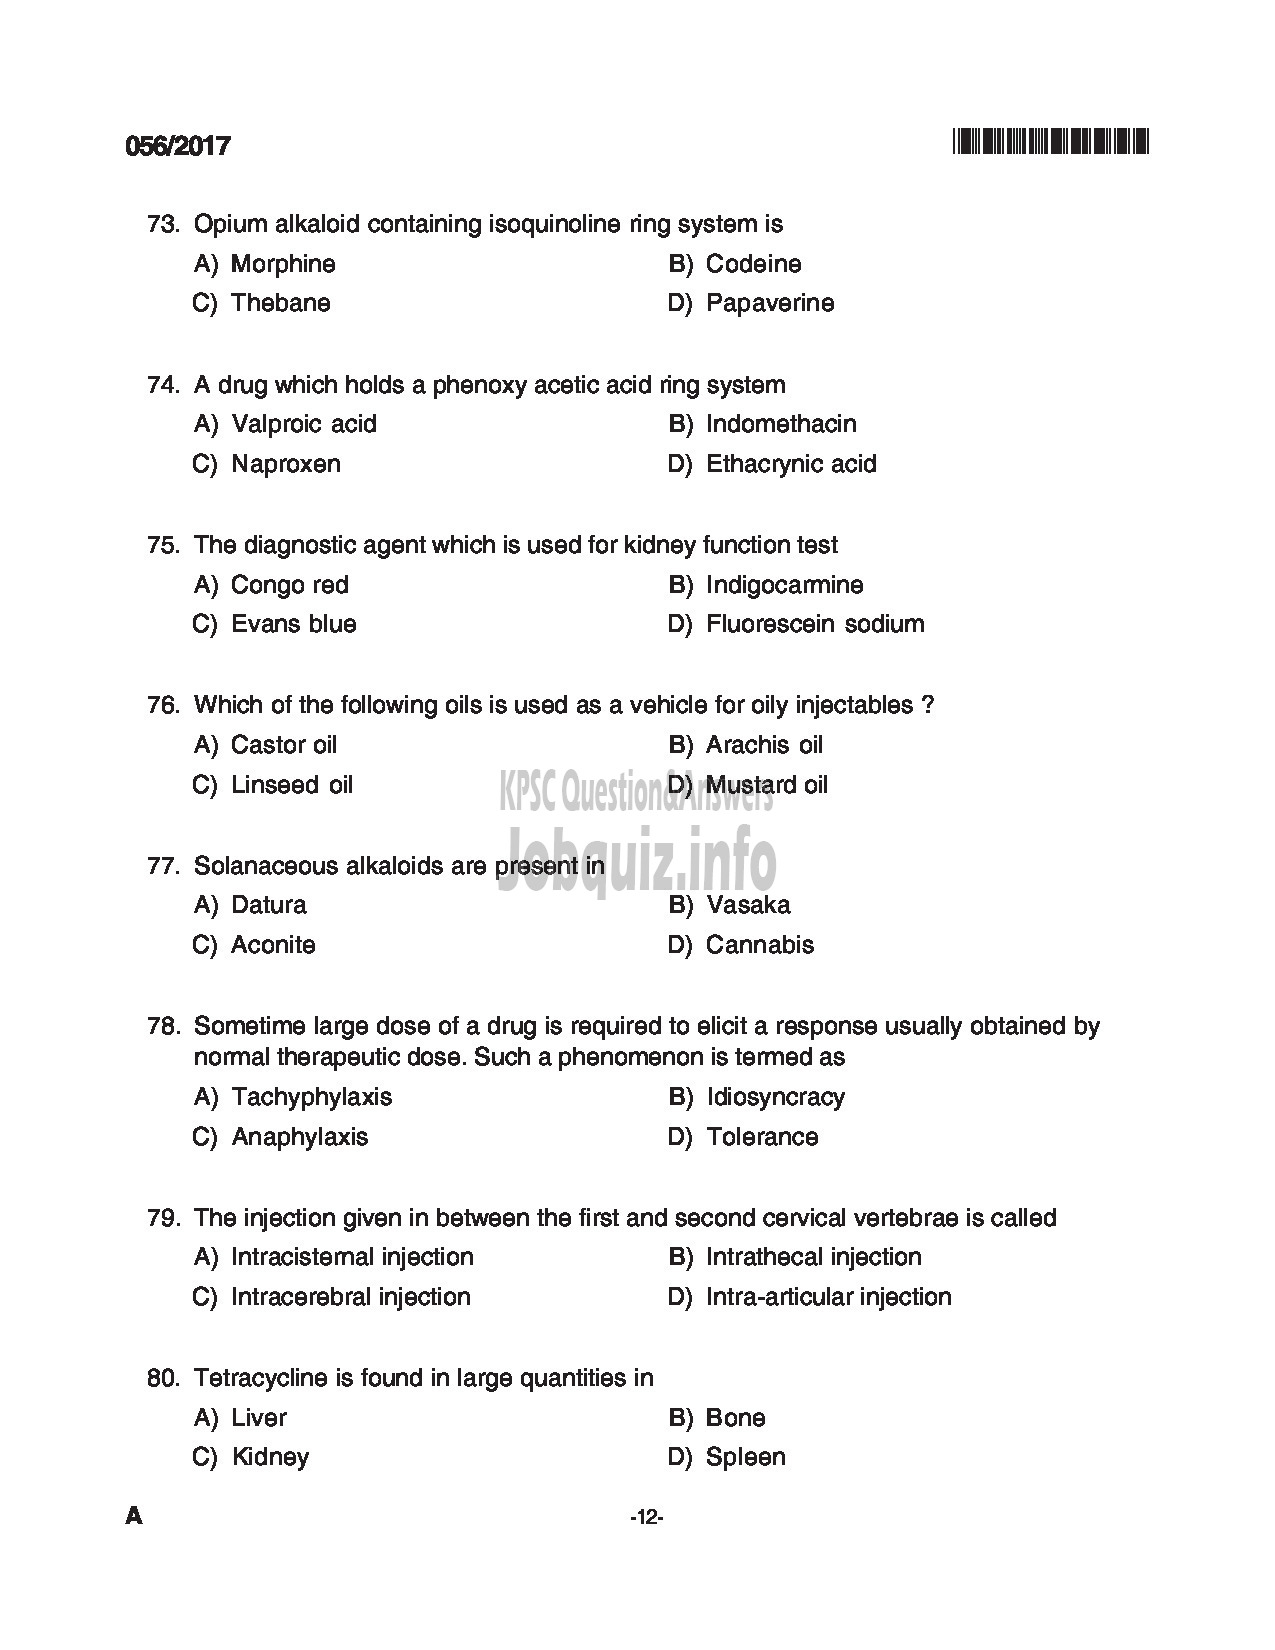 Kerala PSC Question Paper - PHARMACIST GRADE II INSURANCE MEDICAL SERVICES QUESTION PAPER-12